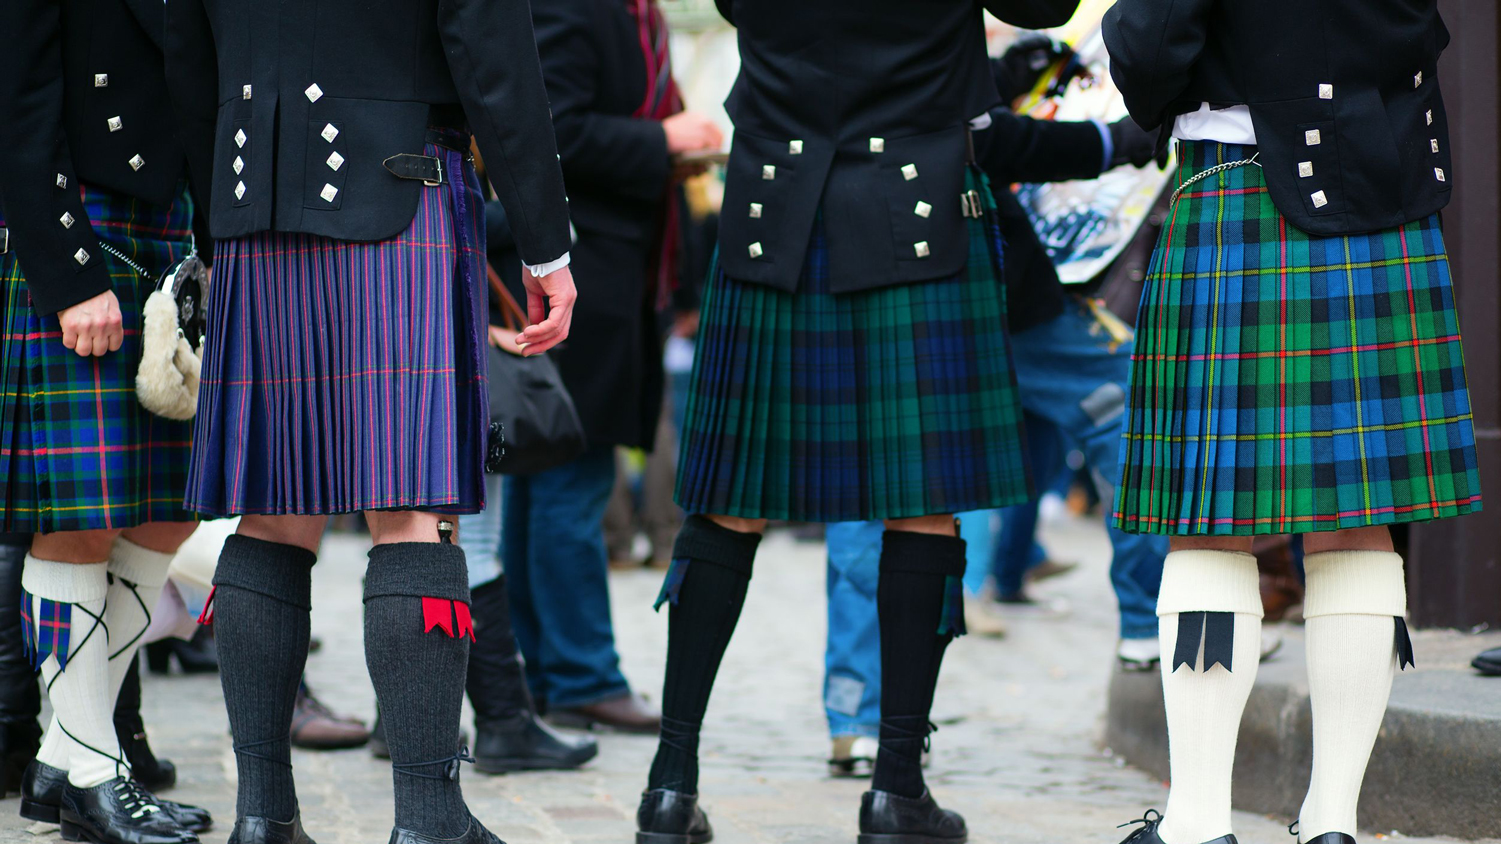 Everything You Wanted to Know About Wearing a Kilt - The Manual